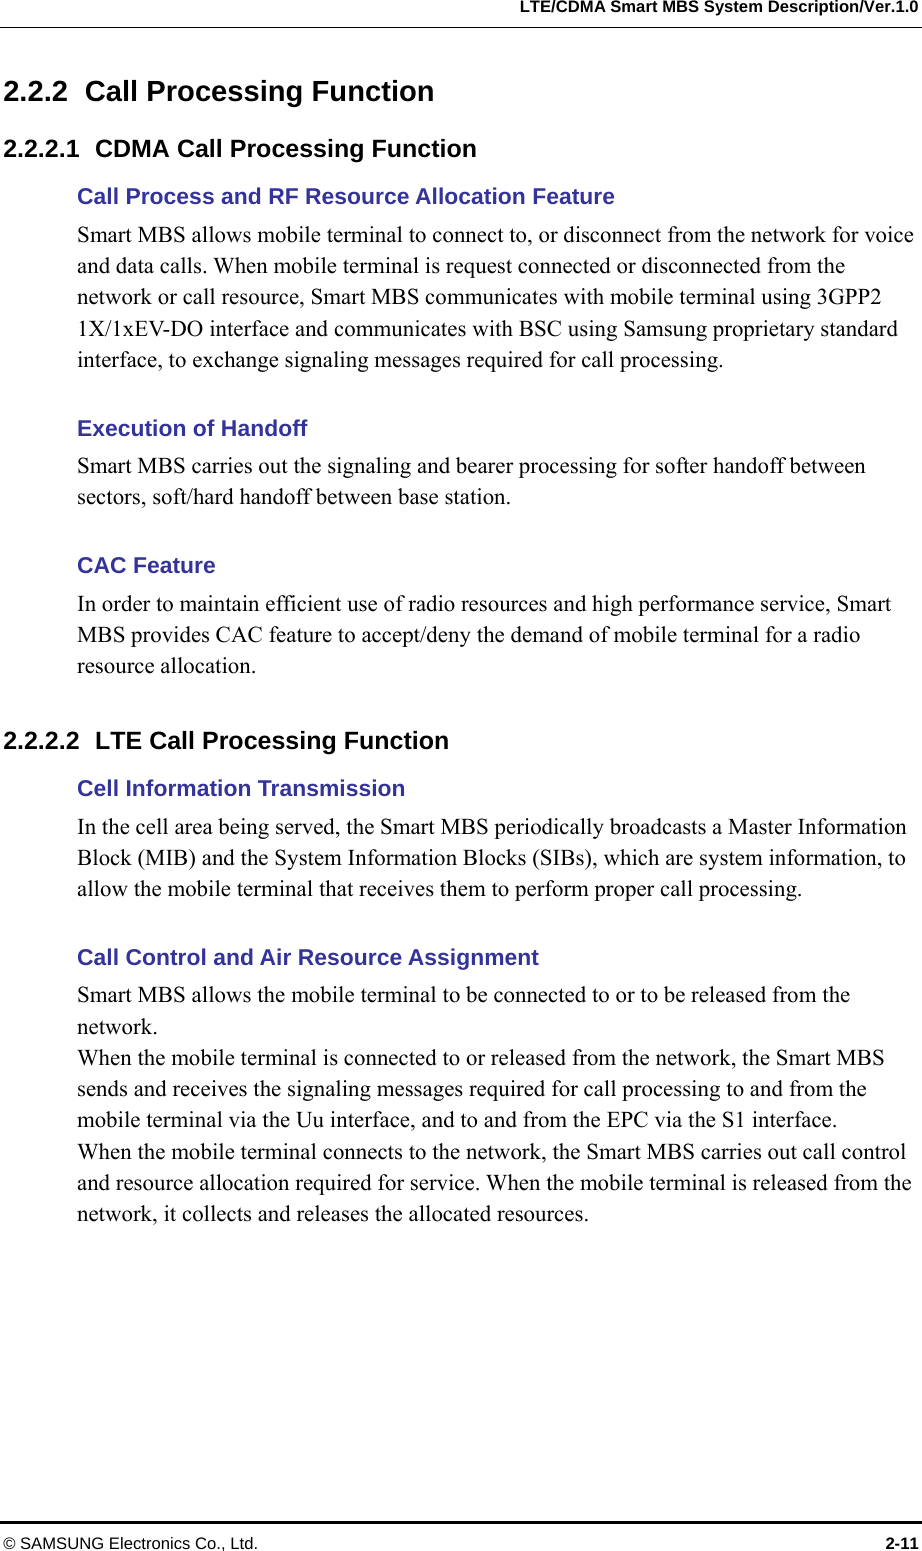   LTE/CDMA Smart MBS System Description/Ver.1.0 © SAMSUNG Electronics Co., Ltd.  2-11 2.2.2  Call Processing Function 2.2.2.1  CDMA Call Processing Function Call Process and RF Resource Allocation Feature   Smart MBS allows mobile terminal to connect to, or disconnect from the network for voice and data calls. When mobile terminal is request connected or disconnected from the network or call resource, Smart MBS communicates with mobile terminal using 3GPP2 1X/1xEV-DO interface and communicates with BSC using Samsung proprietary standard interface, to exchange signaling messages required for call processing.  Execution of Handoff Smart MBS carries out the signaling and bearer processing for softer handoff between sectors, soft/hard handoff between base station.    CAC Feature In order to maintain efficient use of radio resources and high performance service, Smart MBS provides CAC feature to accept/deny the demand of mobile terminal for a radio resource allocation.    2.2.2.2  LTE Call Processing Function Cell Information Transmission In the cell area being served, the Smart MBS periodically broadcasts a Master Information Block (MIB) and the System Information Blocks (SIBs), which are system information, to allow the mobile terminal that receives them to perform proper call processing.  Call Control and Air Resource Assignment Smart MBS allows the mobile terminal to be connected to or to be released from the network. When the mobile terminal is connected to or released from the network, the Smart MBS sends and receives the signaling messages required for call processing to and from the mobile terminal via the Uu interface, and to and from the EPC via the S1 interface. When the mobile terminal connects to the network, the Smart MBS carries out call control and resource allocation required for service. When the mobile terminal is released from the network, it collects and releases the allocated resources.  